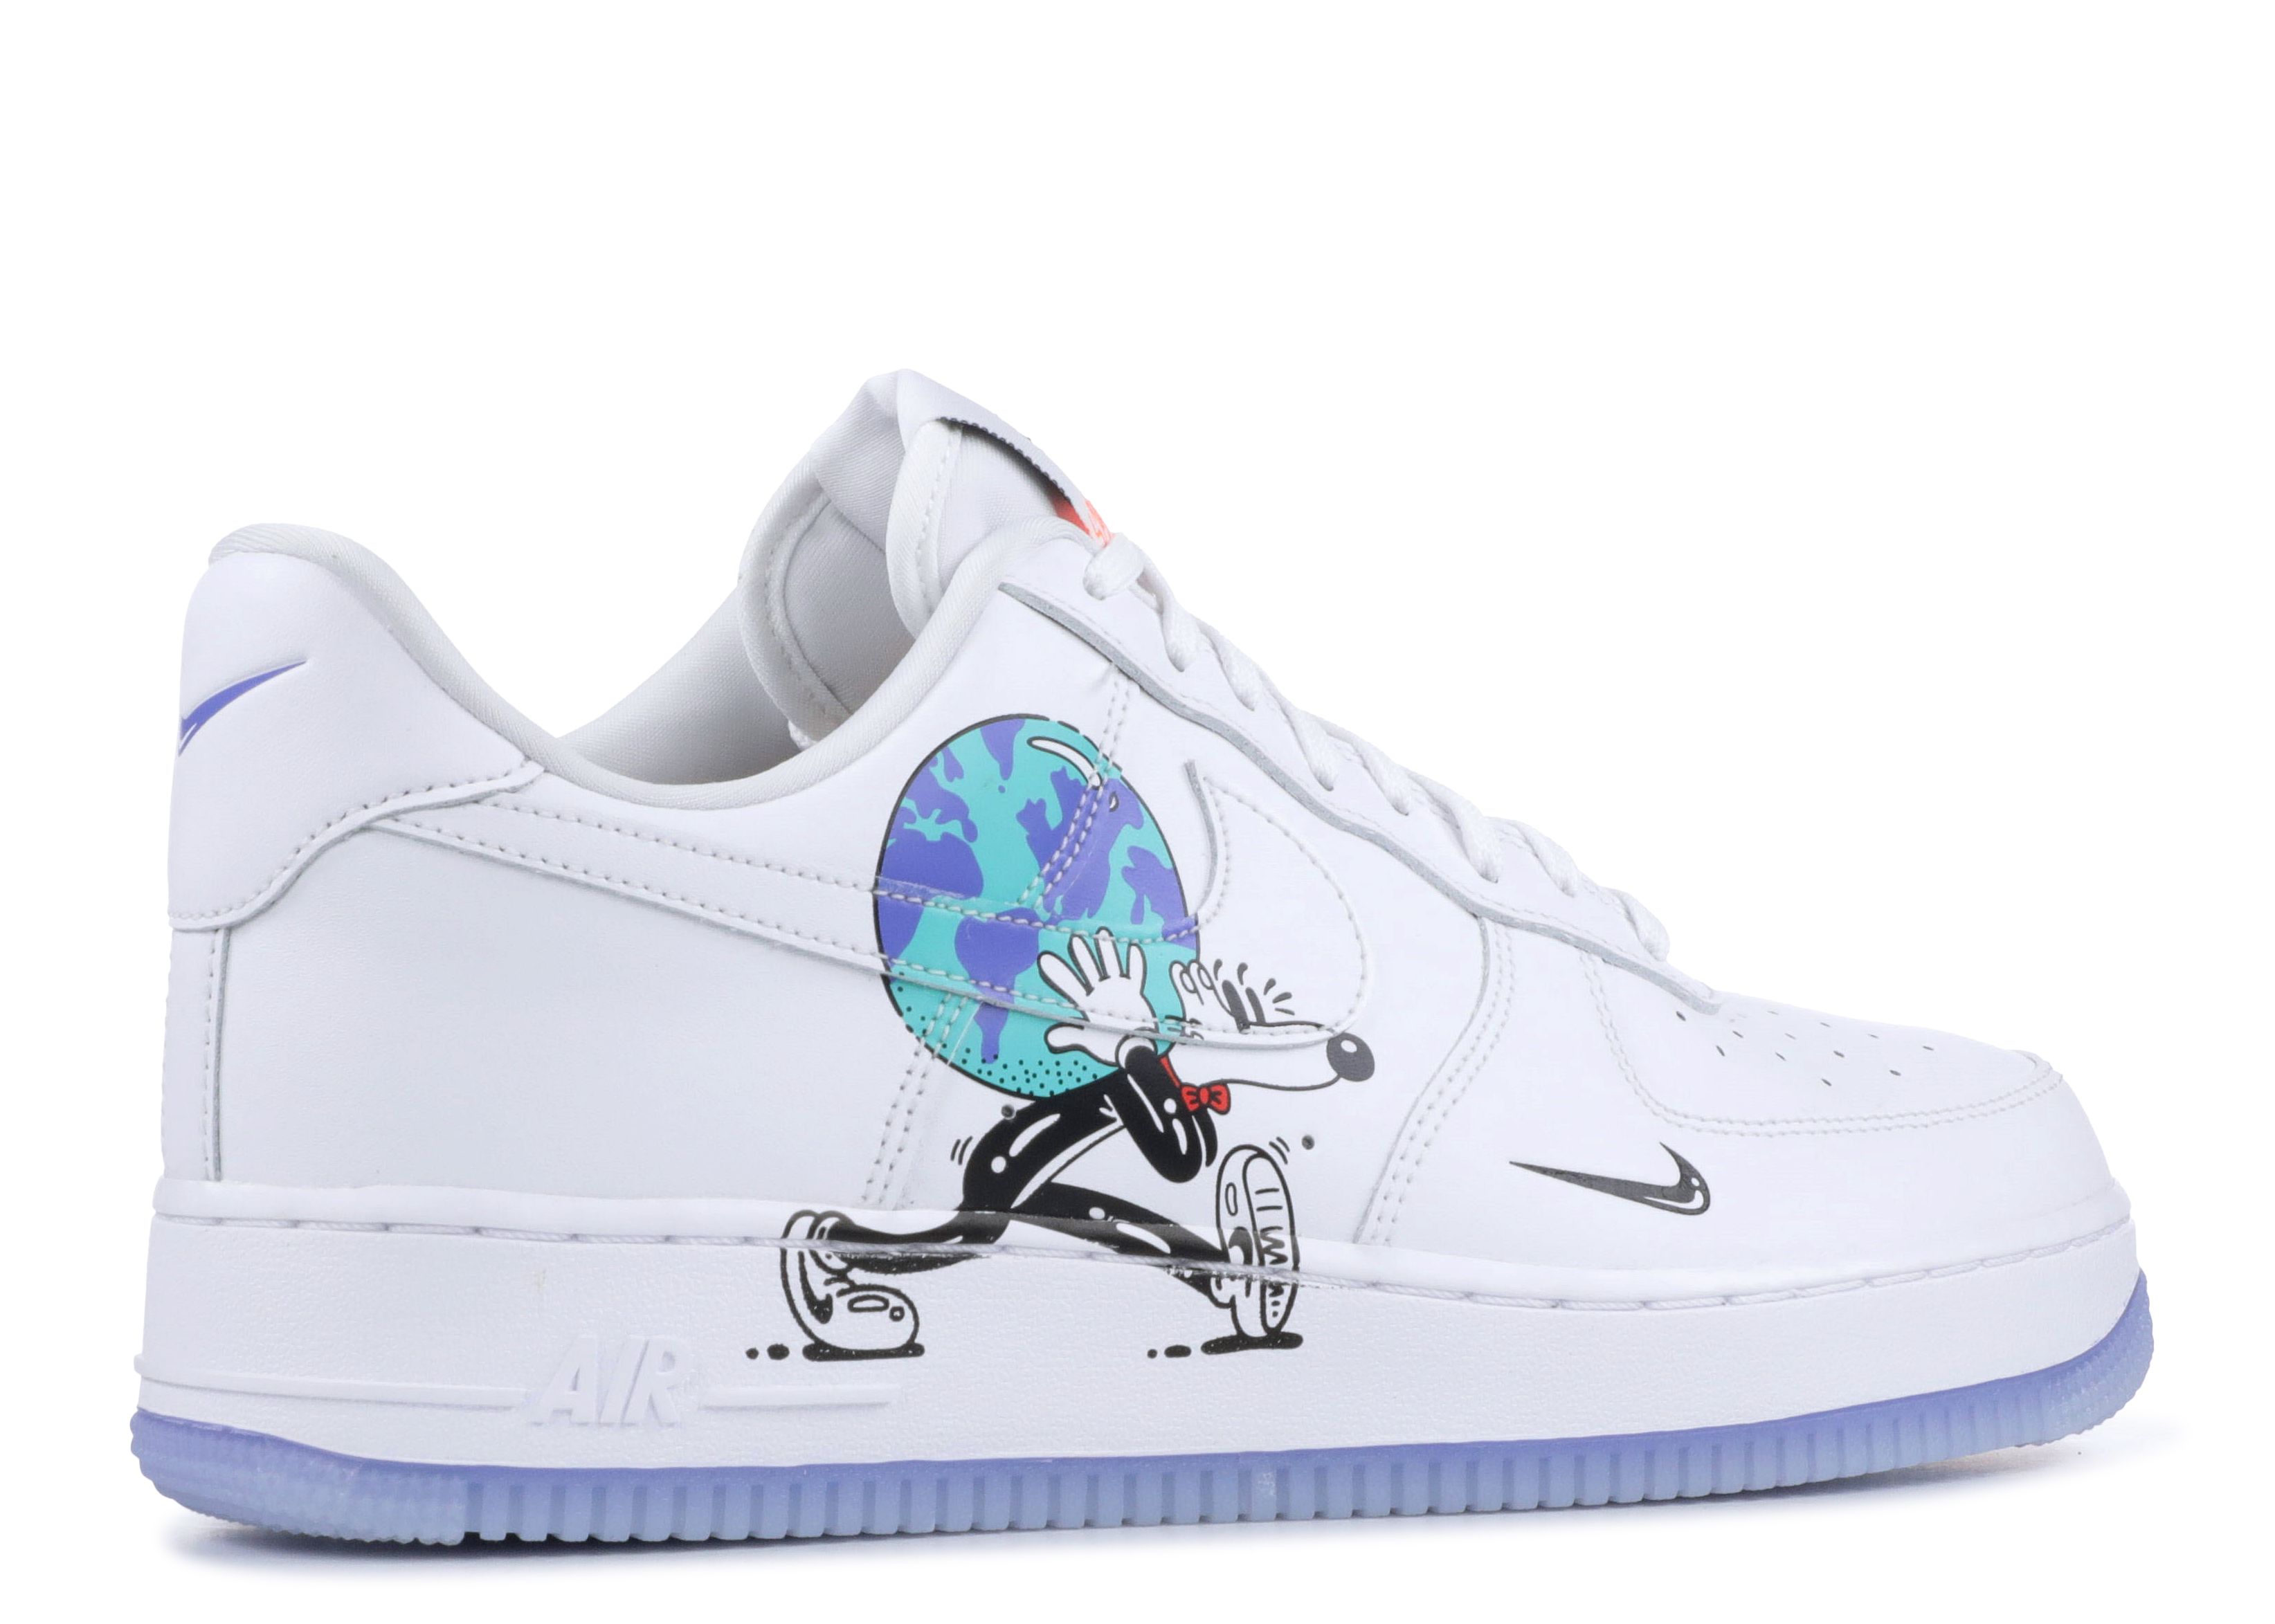 Steven Harrington x Air Force 1 Low Flyleather QS 'Earth Day'